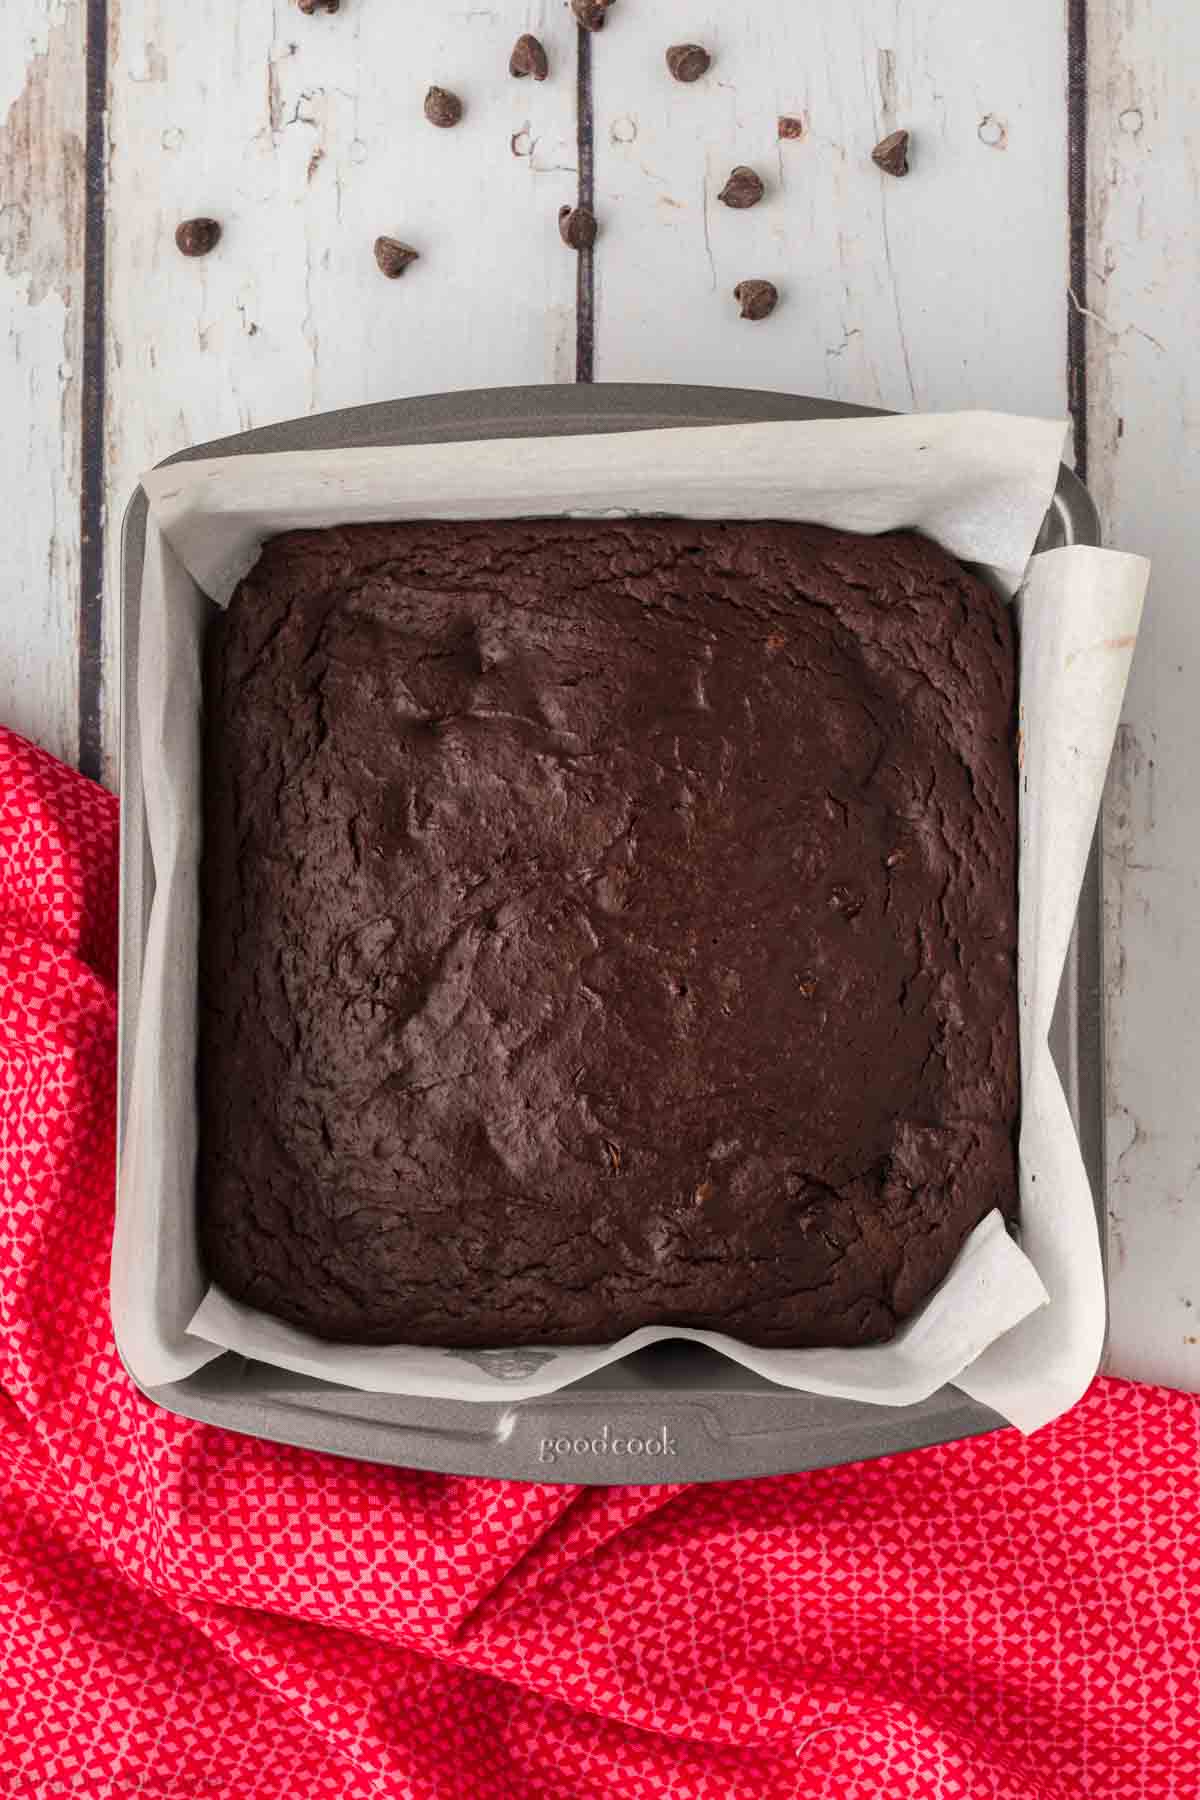 Baked brownie in the baking dish